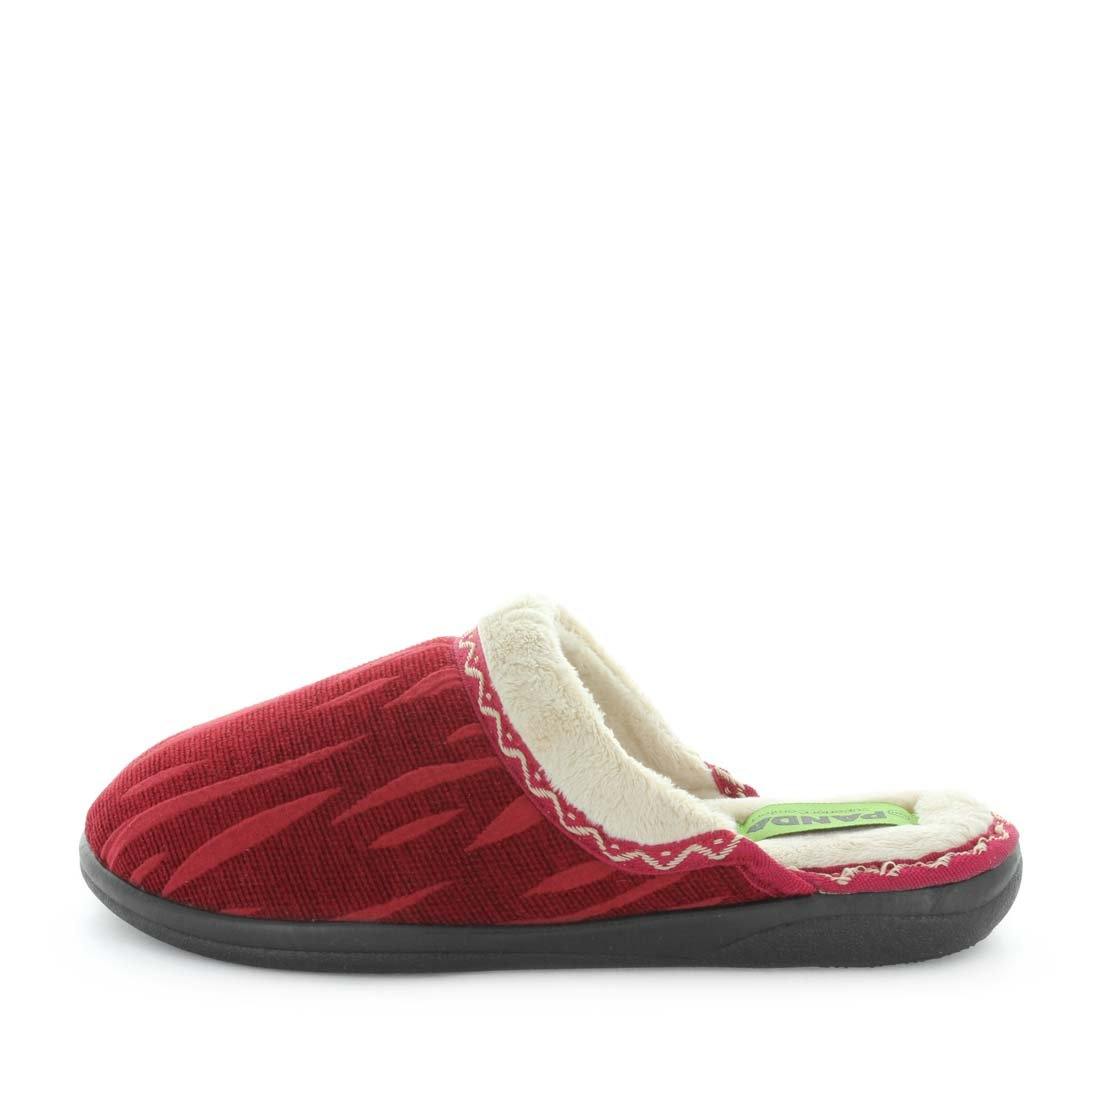 womens slippers - burgundy engel slipper, by panda Slippers. A scuff style slipper with a soft, warm lining and sock and extra comfortable fit